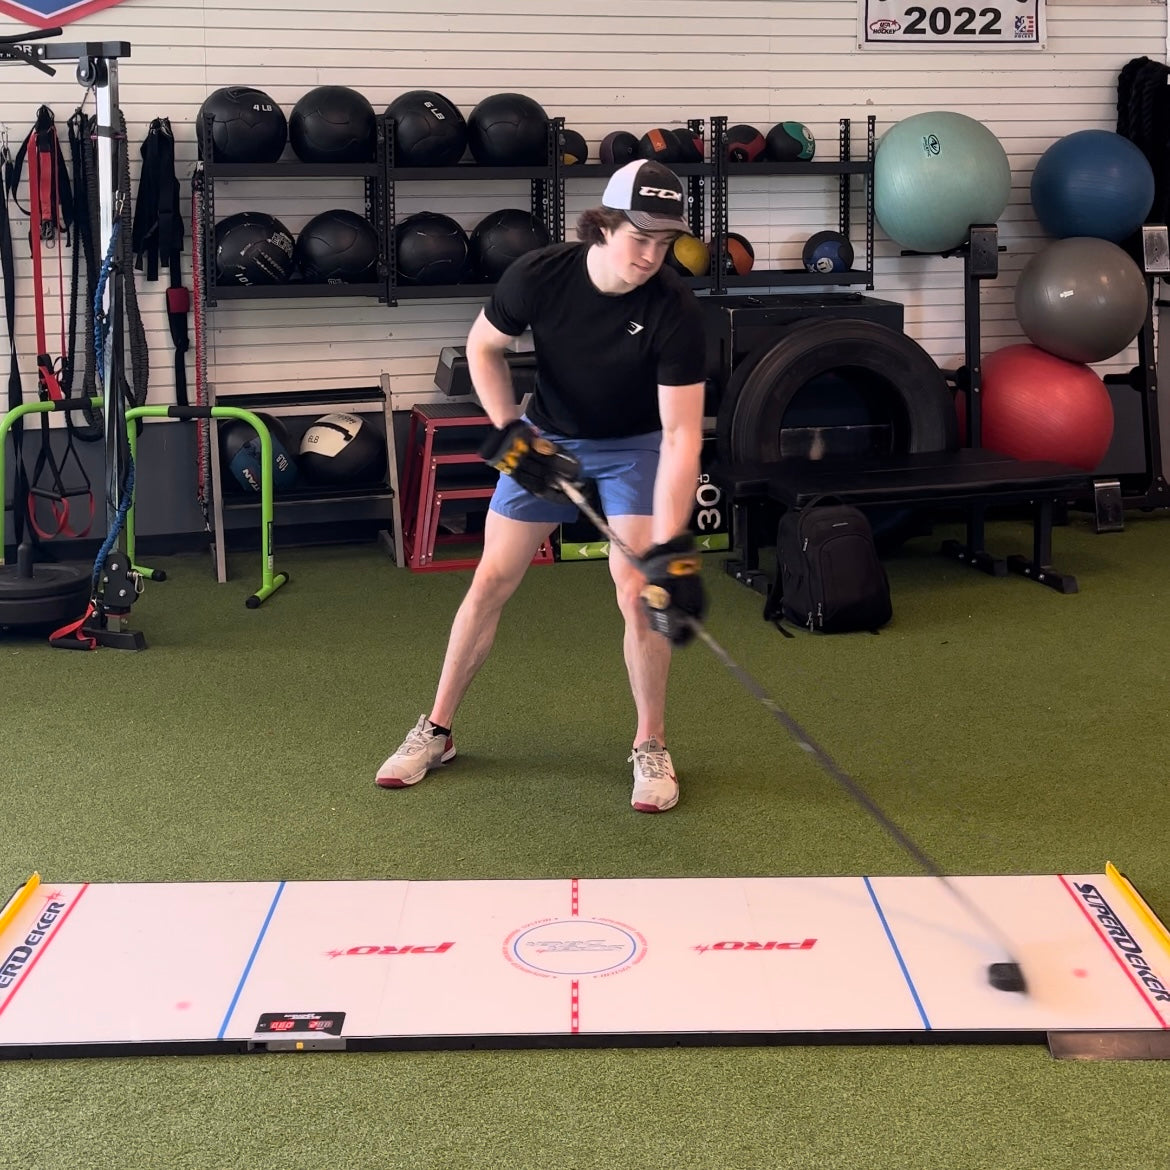 The SuperDeker ePuck is the perfect hockey stickhandling training aid for SuperDeker because it feels like a real puck with the same weight and slickness!